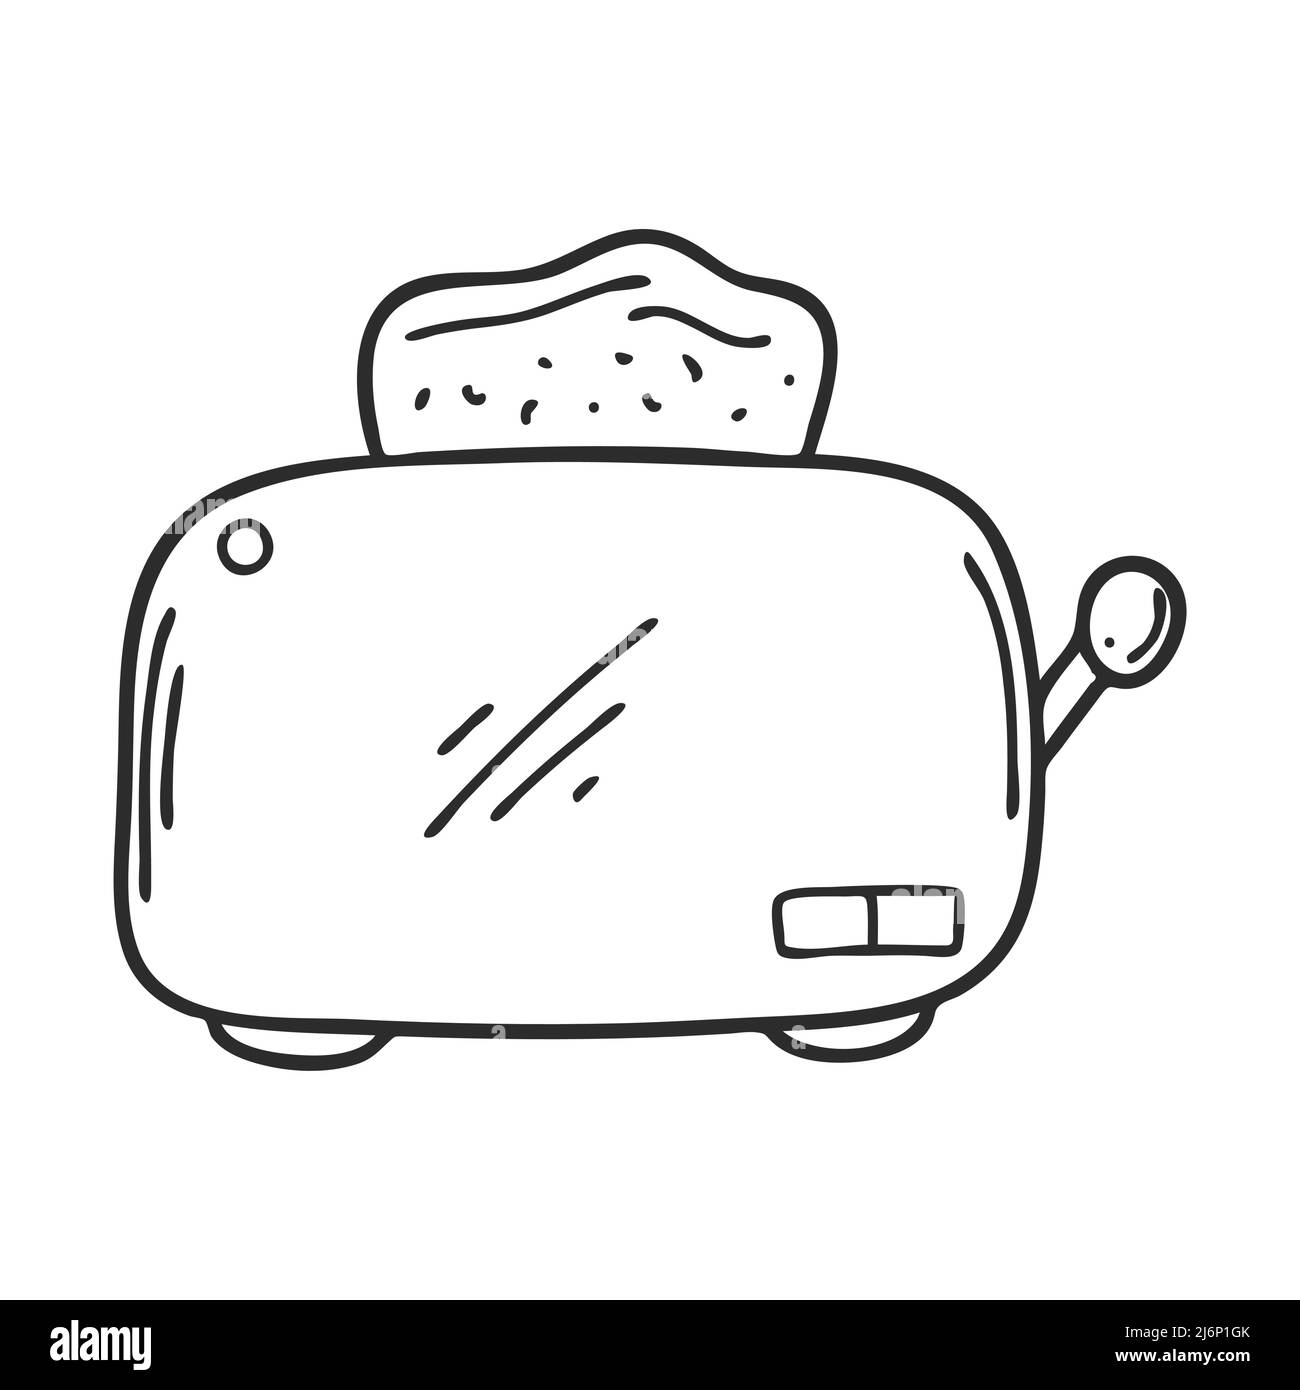 Doodle style electric toaster. Kitchen appliance for making toast for breakfast. Design element for decorating menus, recipes, packaging for food. Han Stock Vector